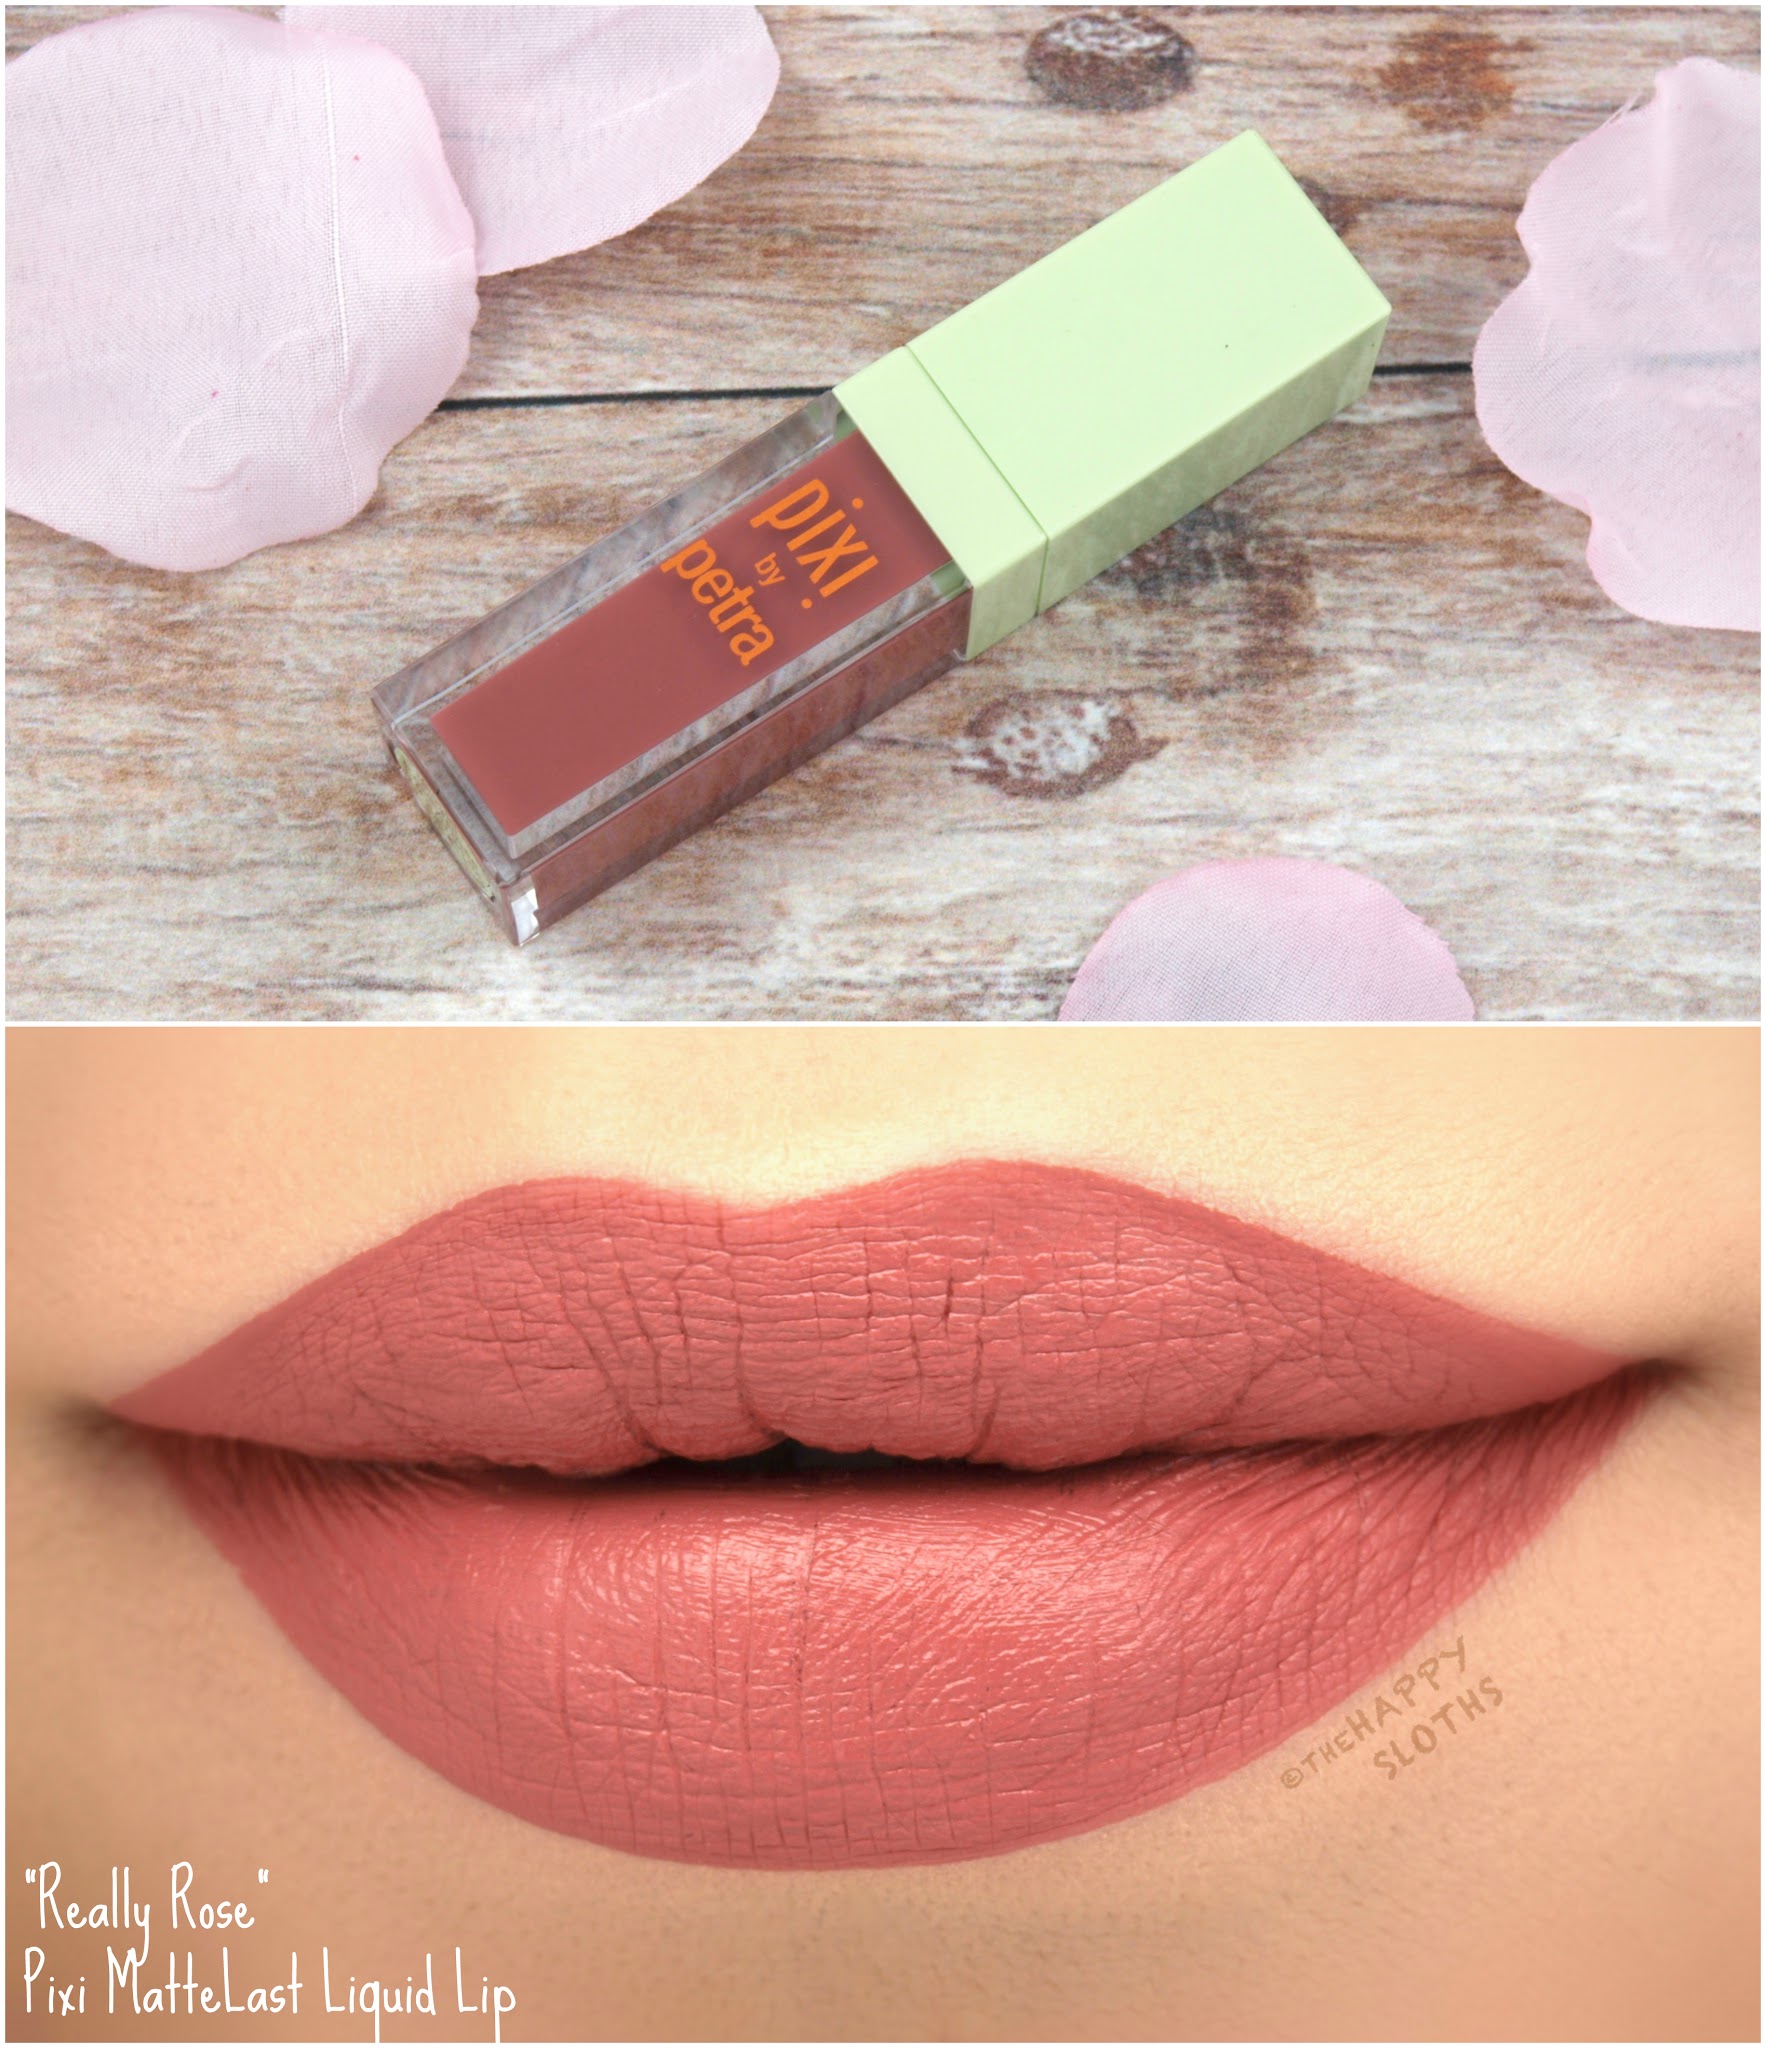 Pixi MatteLast Liquid Lip in "Really Rose": Review and Swatches